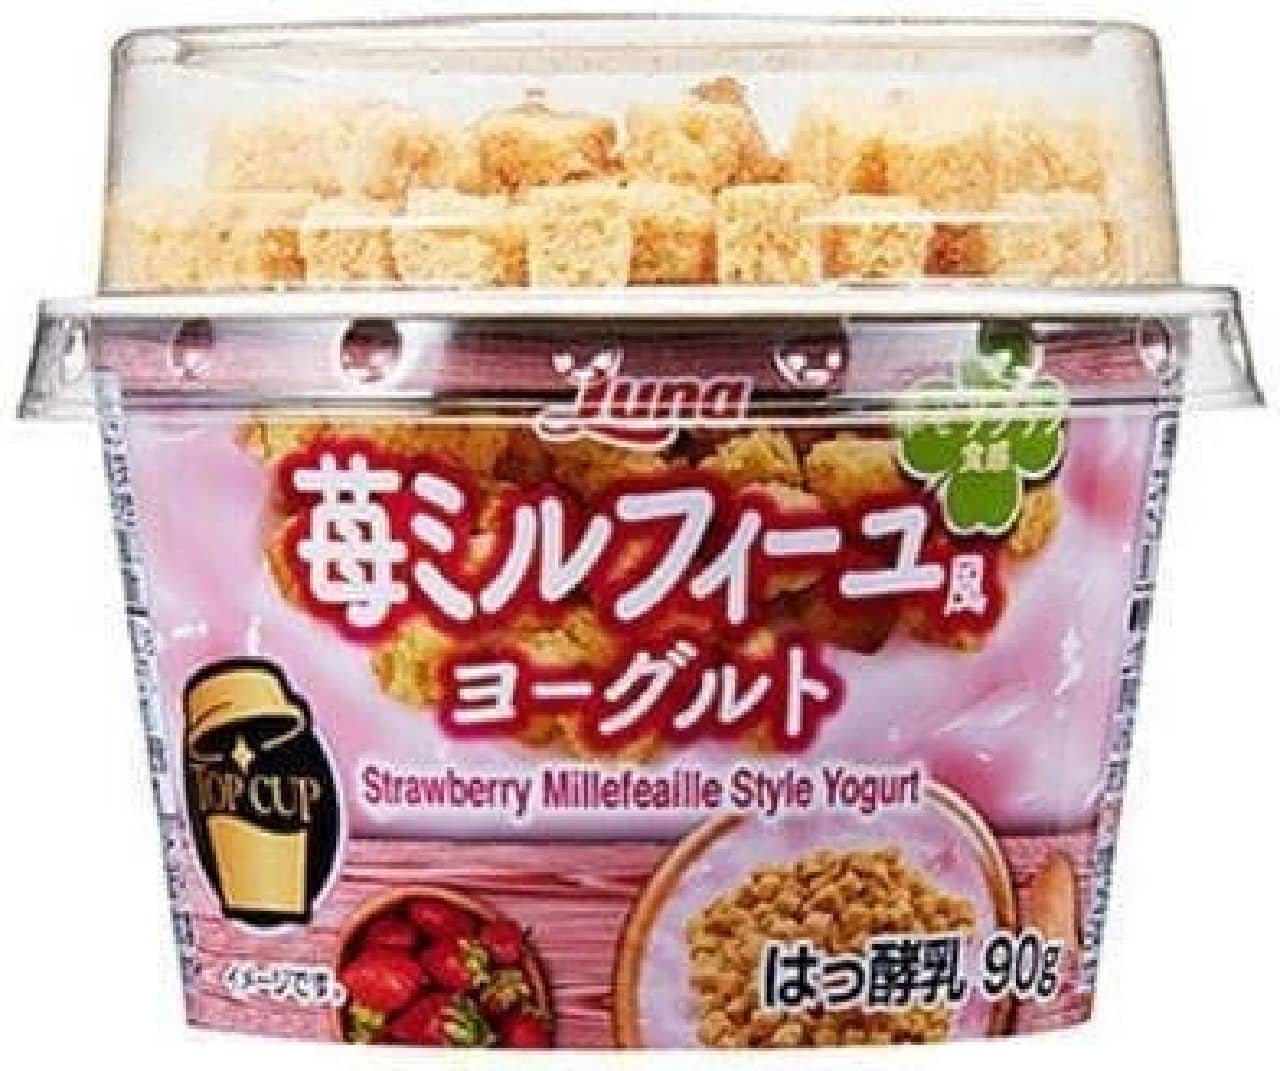 Japanese Luna "TOP CUP Strawberry Millefeuille Style Yogurt"